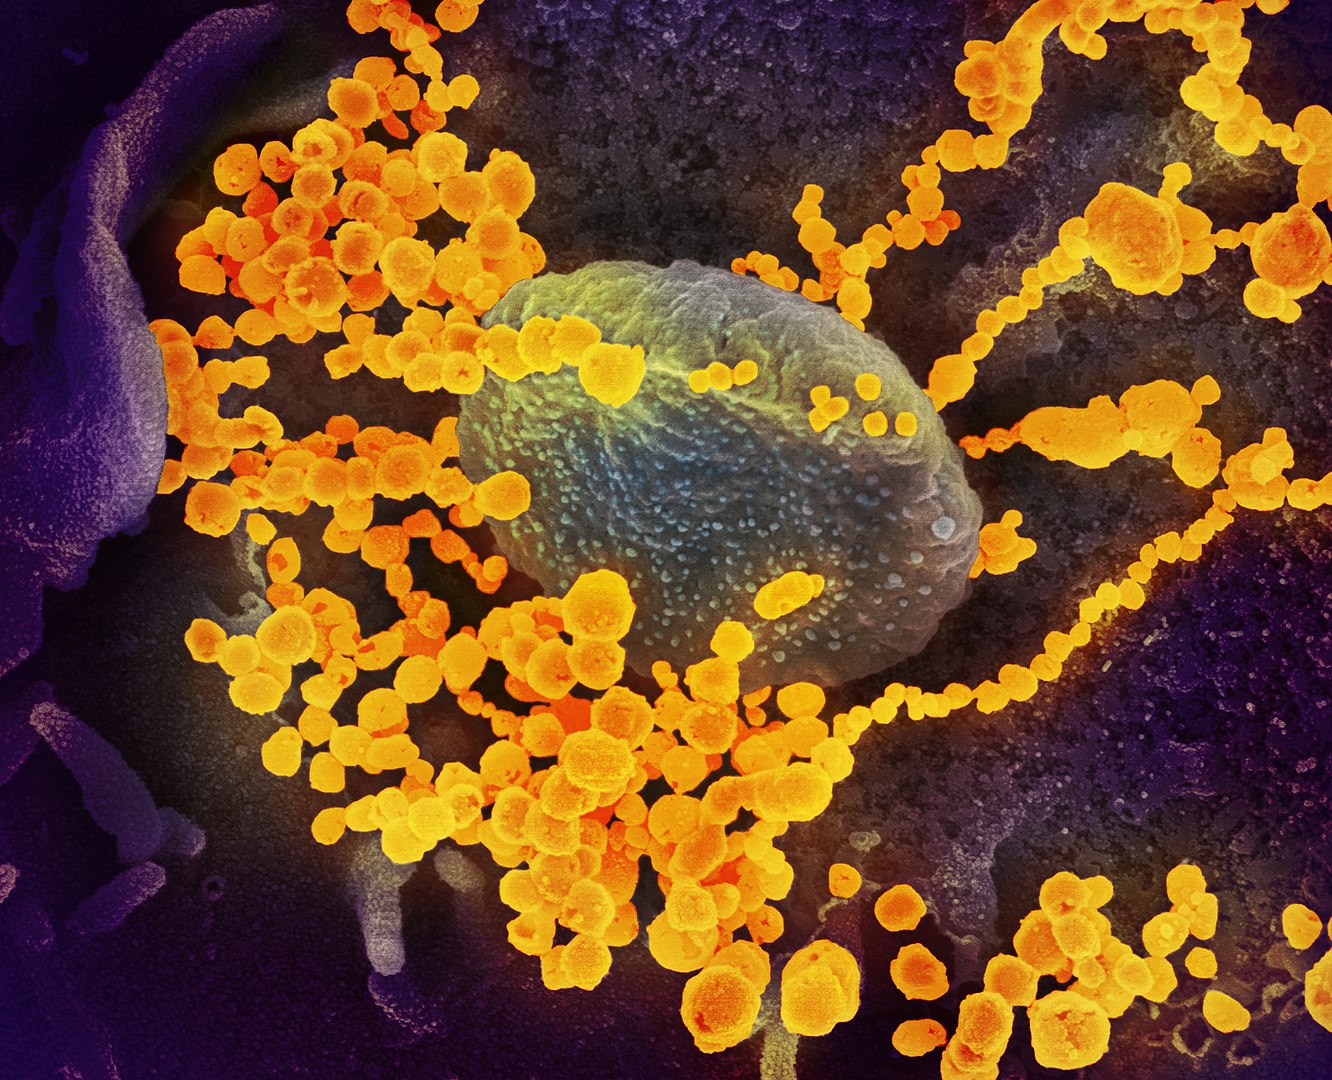 SEM image of SARS-CoV-2 (gold) emerging from the surface of cells cultured in lab by National Institute of Allergy and Infectious Diseases-https://www.flickr.com/photos/niaid/49557785797, CC BY 2.0